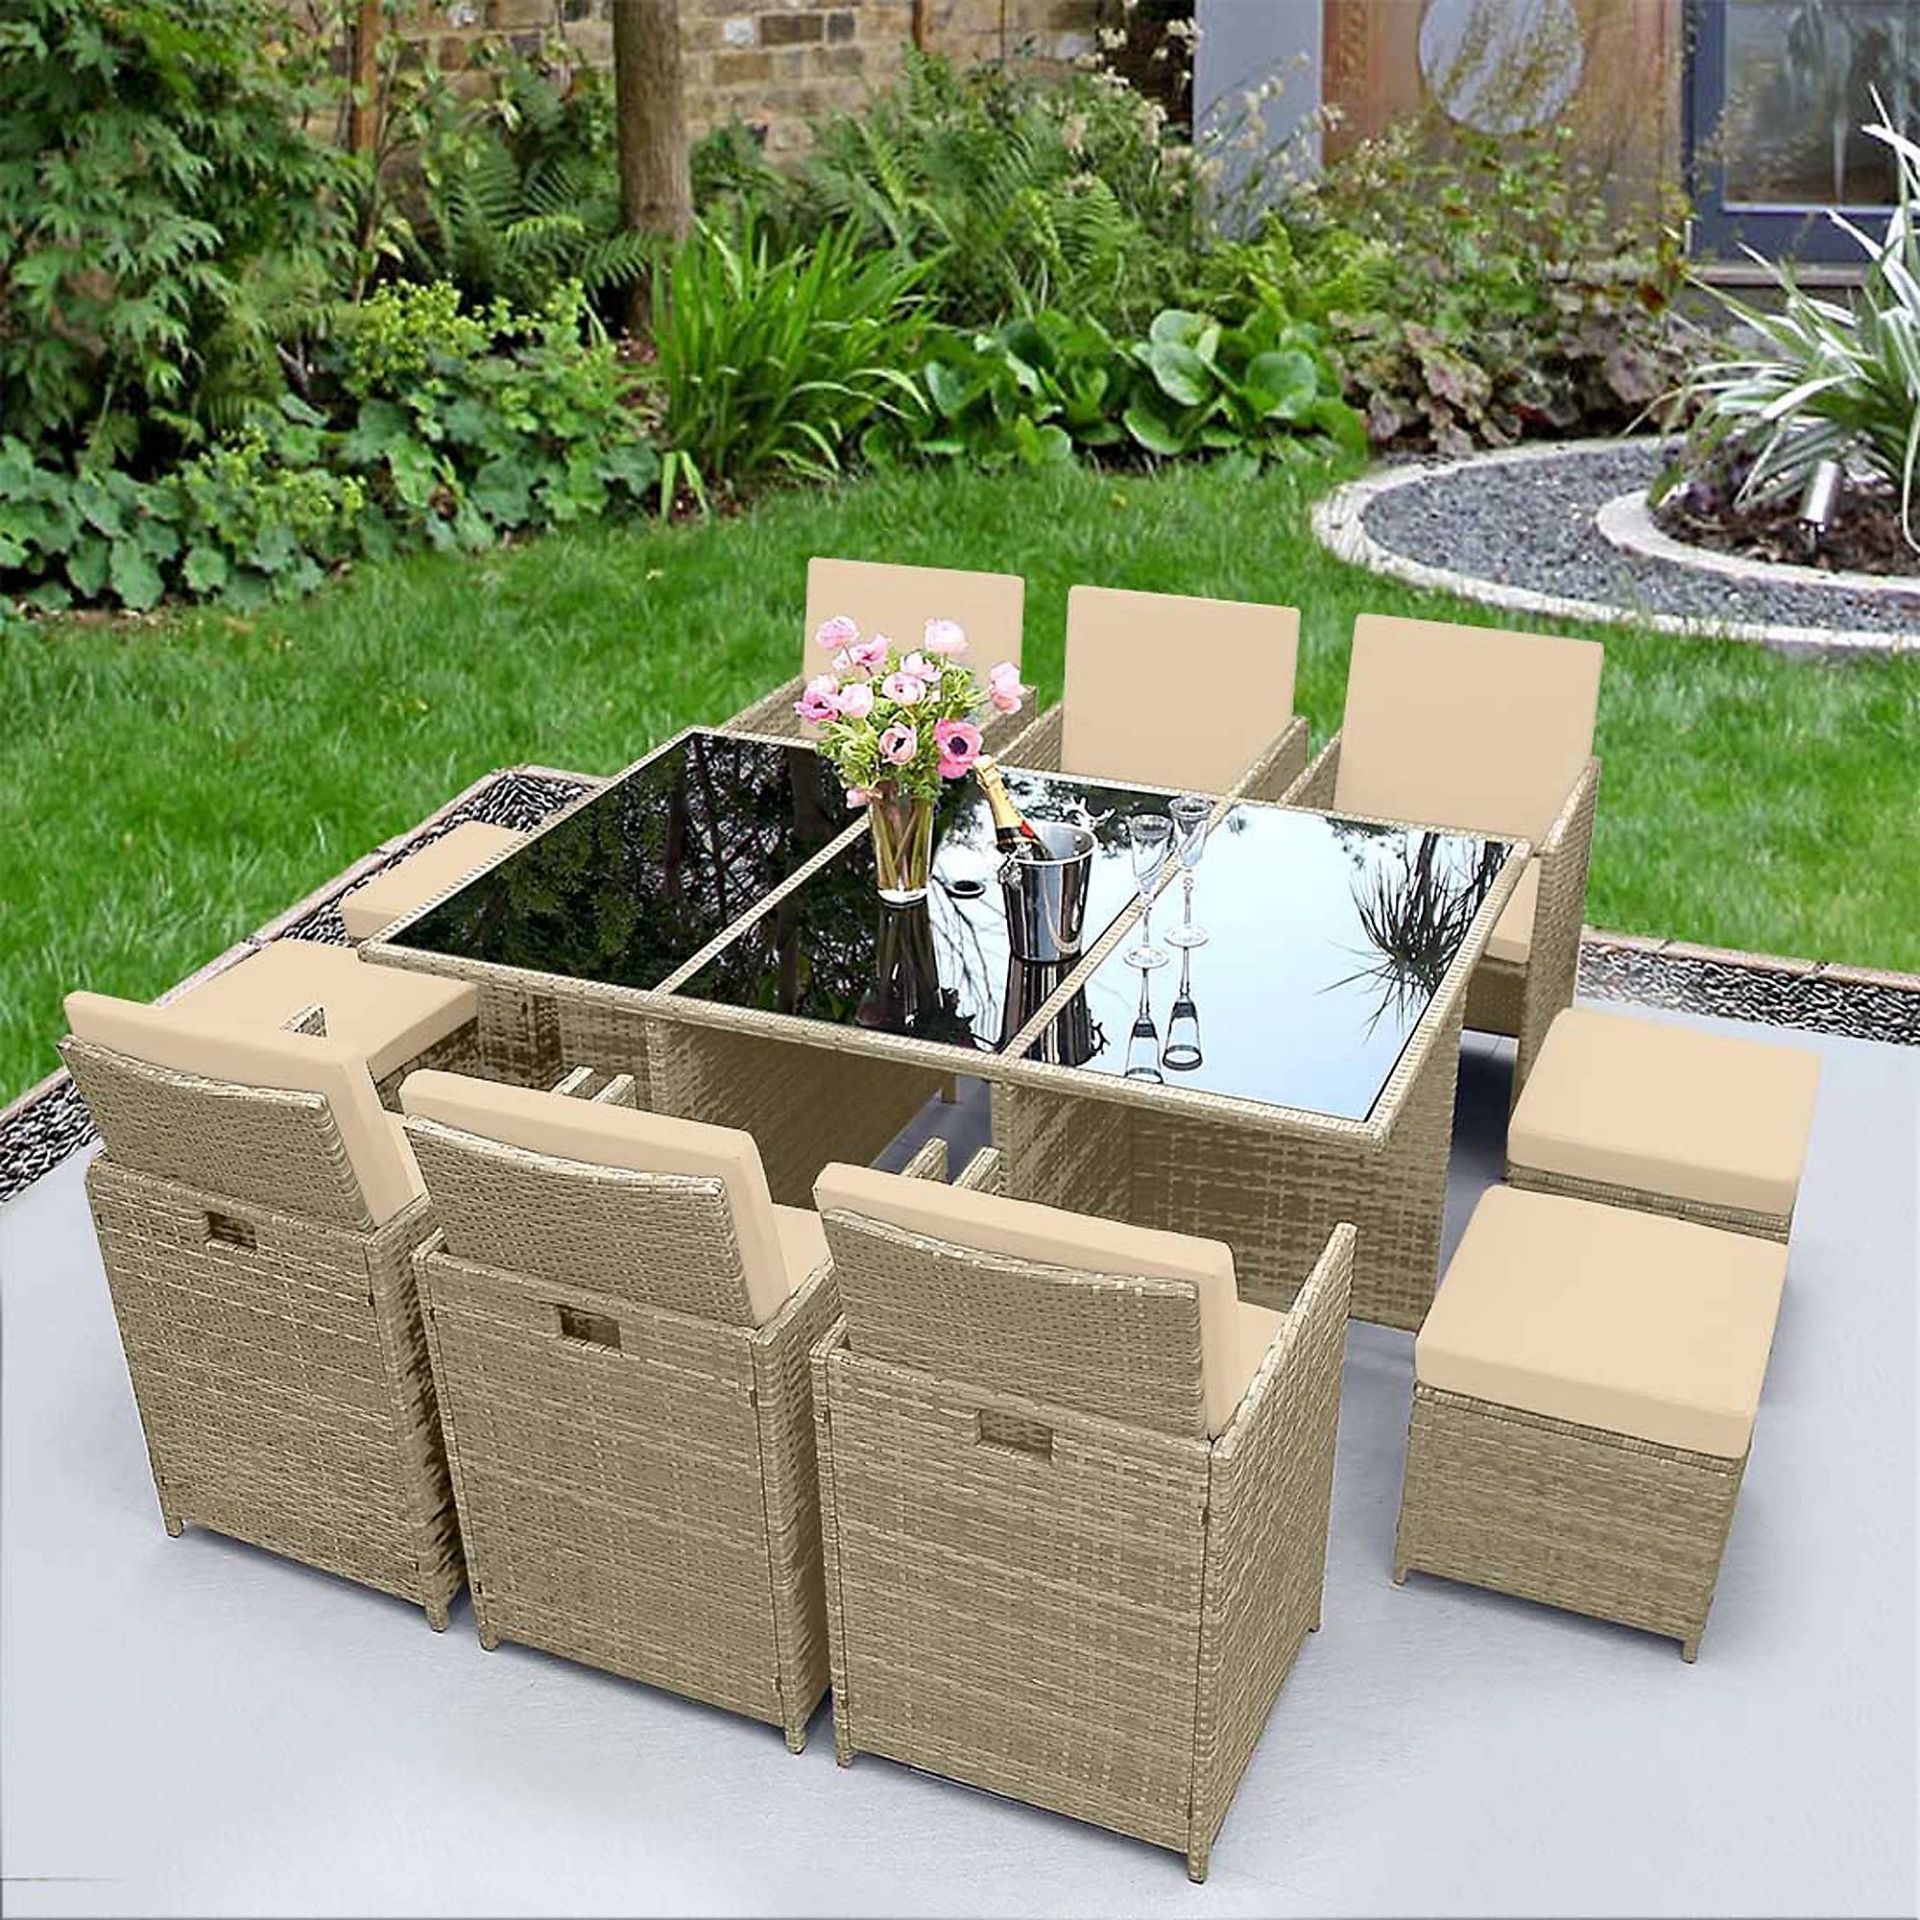 5 x boxes of Furniture Online Ex-Retail Customer Returns Mixed Lot - Total RRP est. 1649This lot